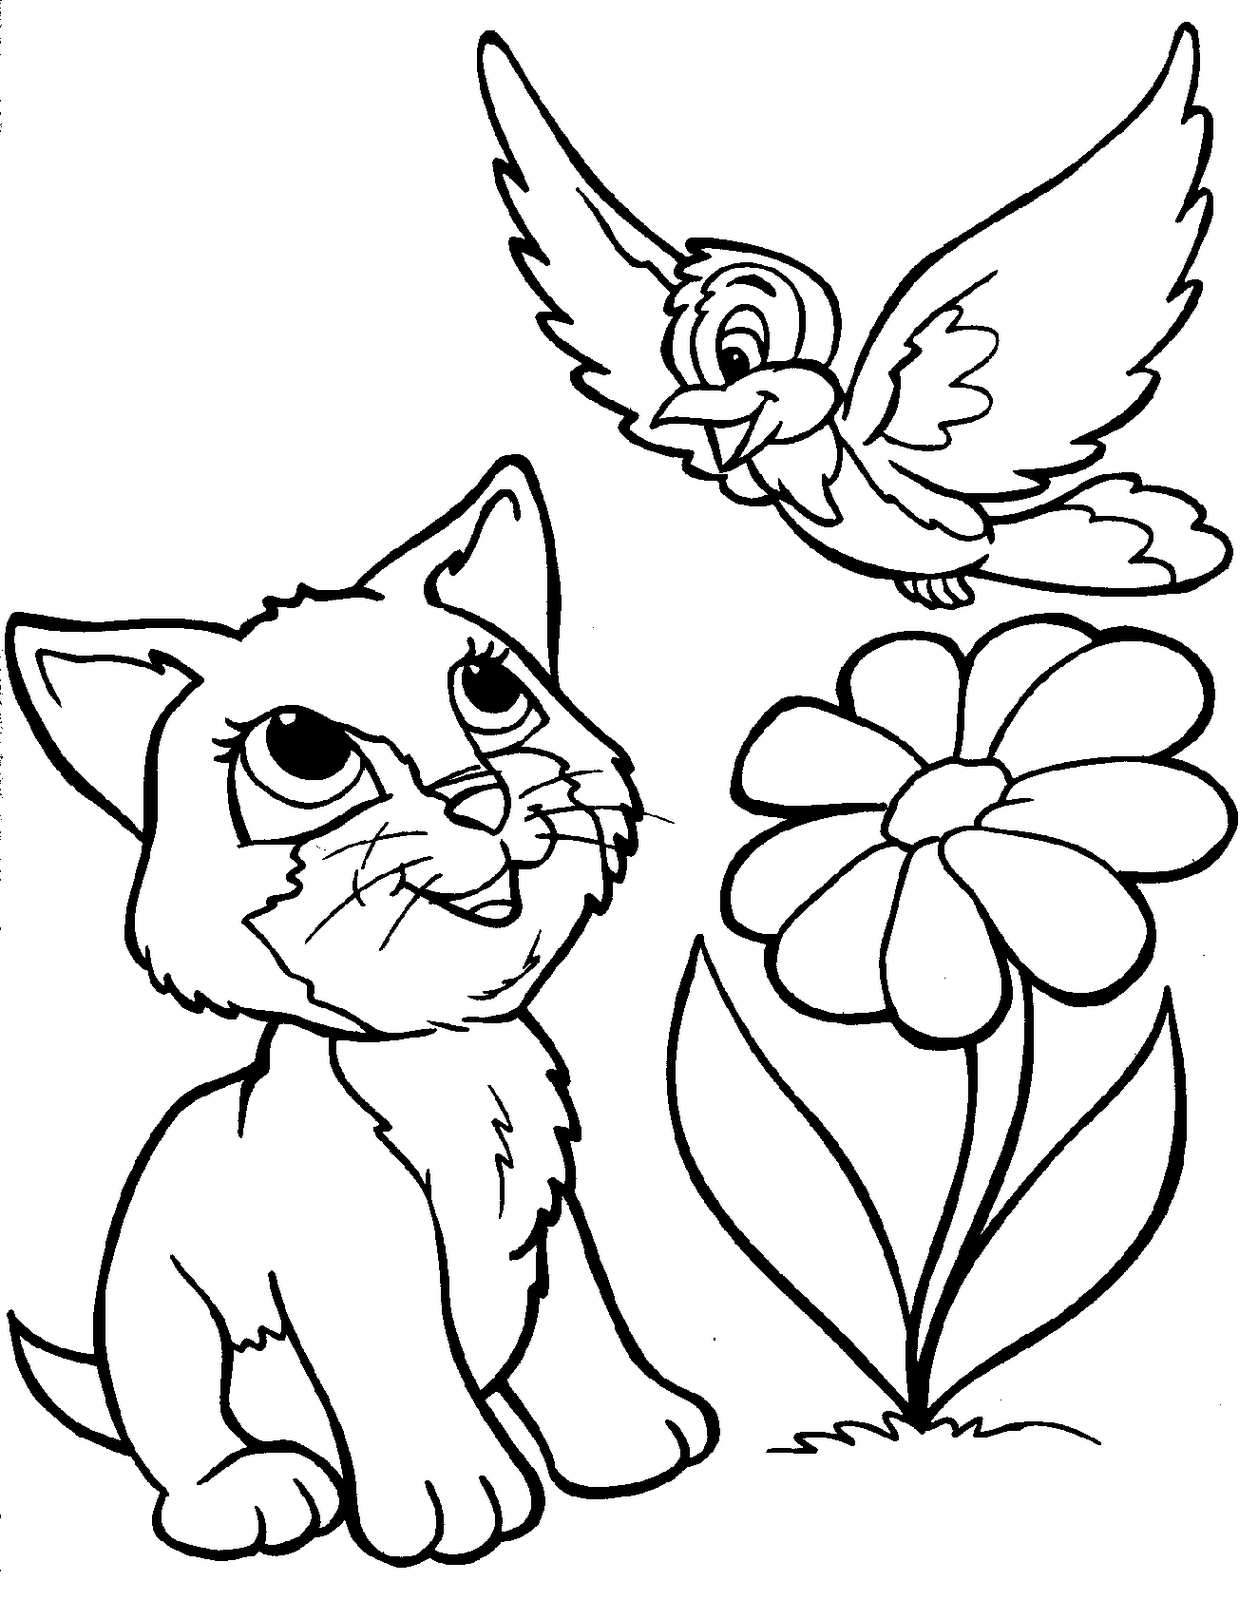 Cat In The Hat Coloring Pages Free Printable | Animal Coloring ...